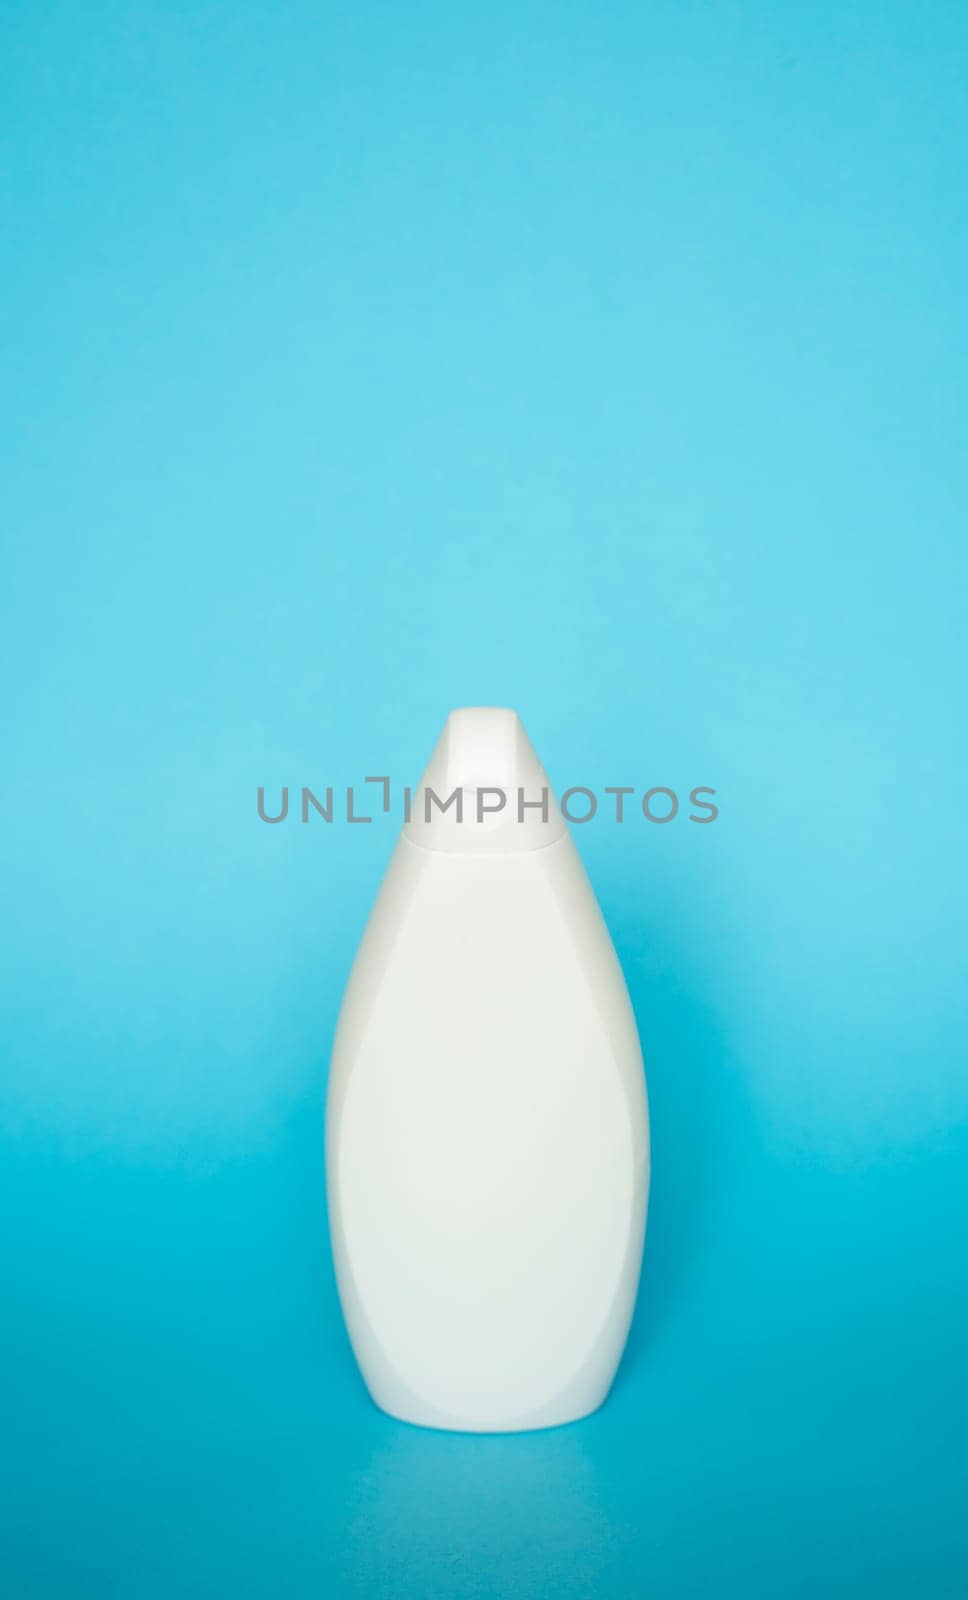 White plastic soap or shampoo bottle isolated on blue background. Skin care lotion. Bathing essential product. Shampoo bottle. Bath and body lotion. Fine liquid hand wash. Bathroom accessories